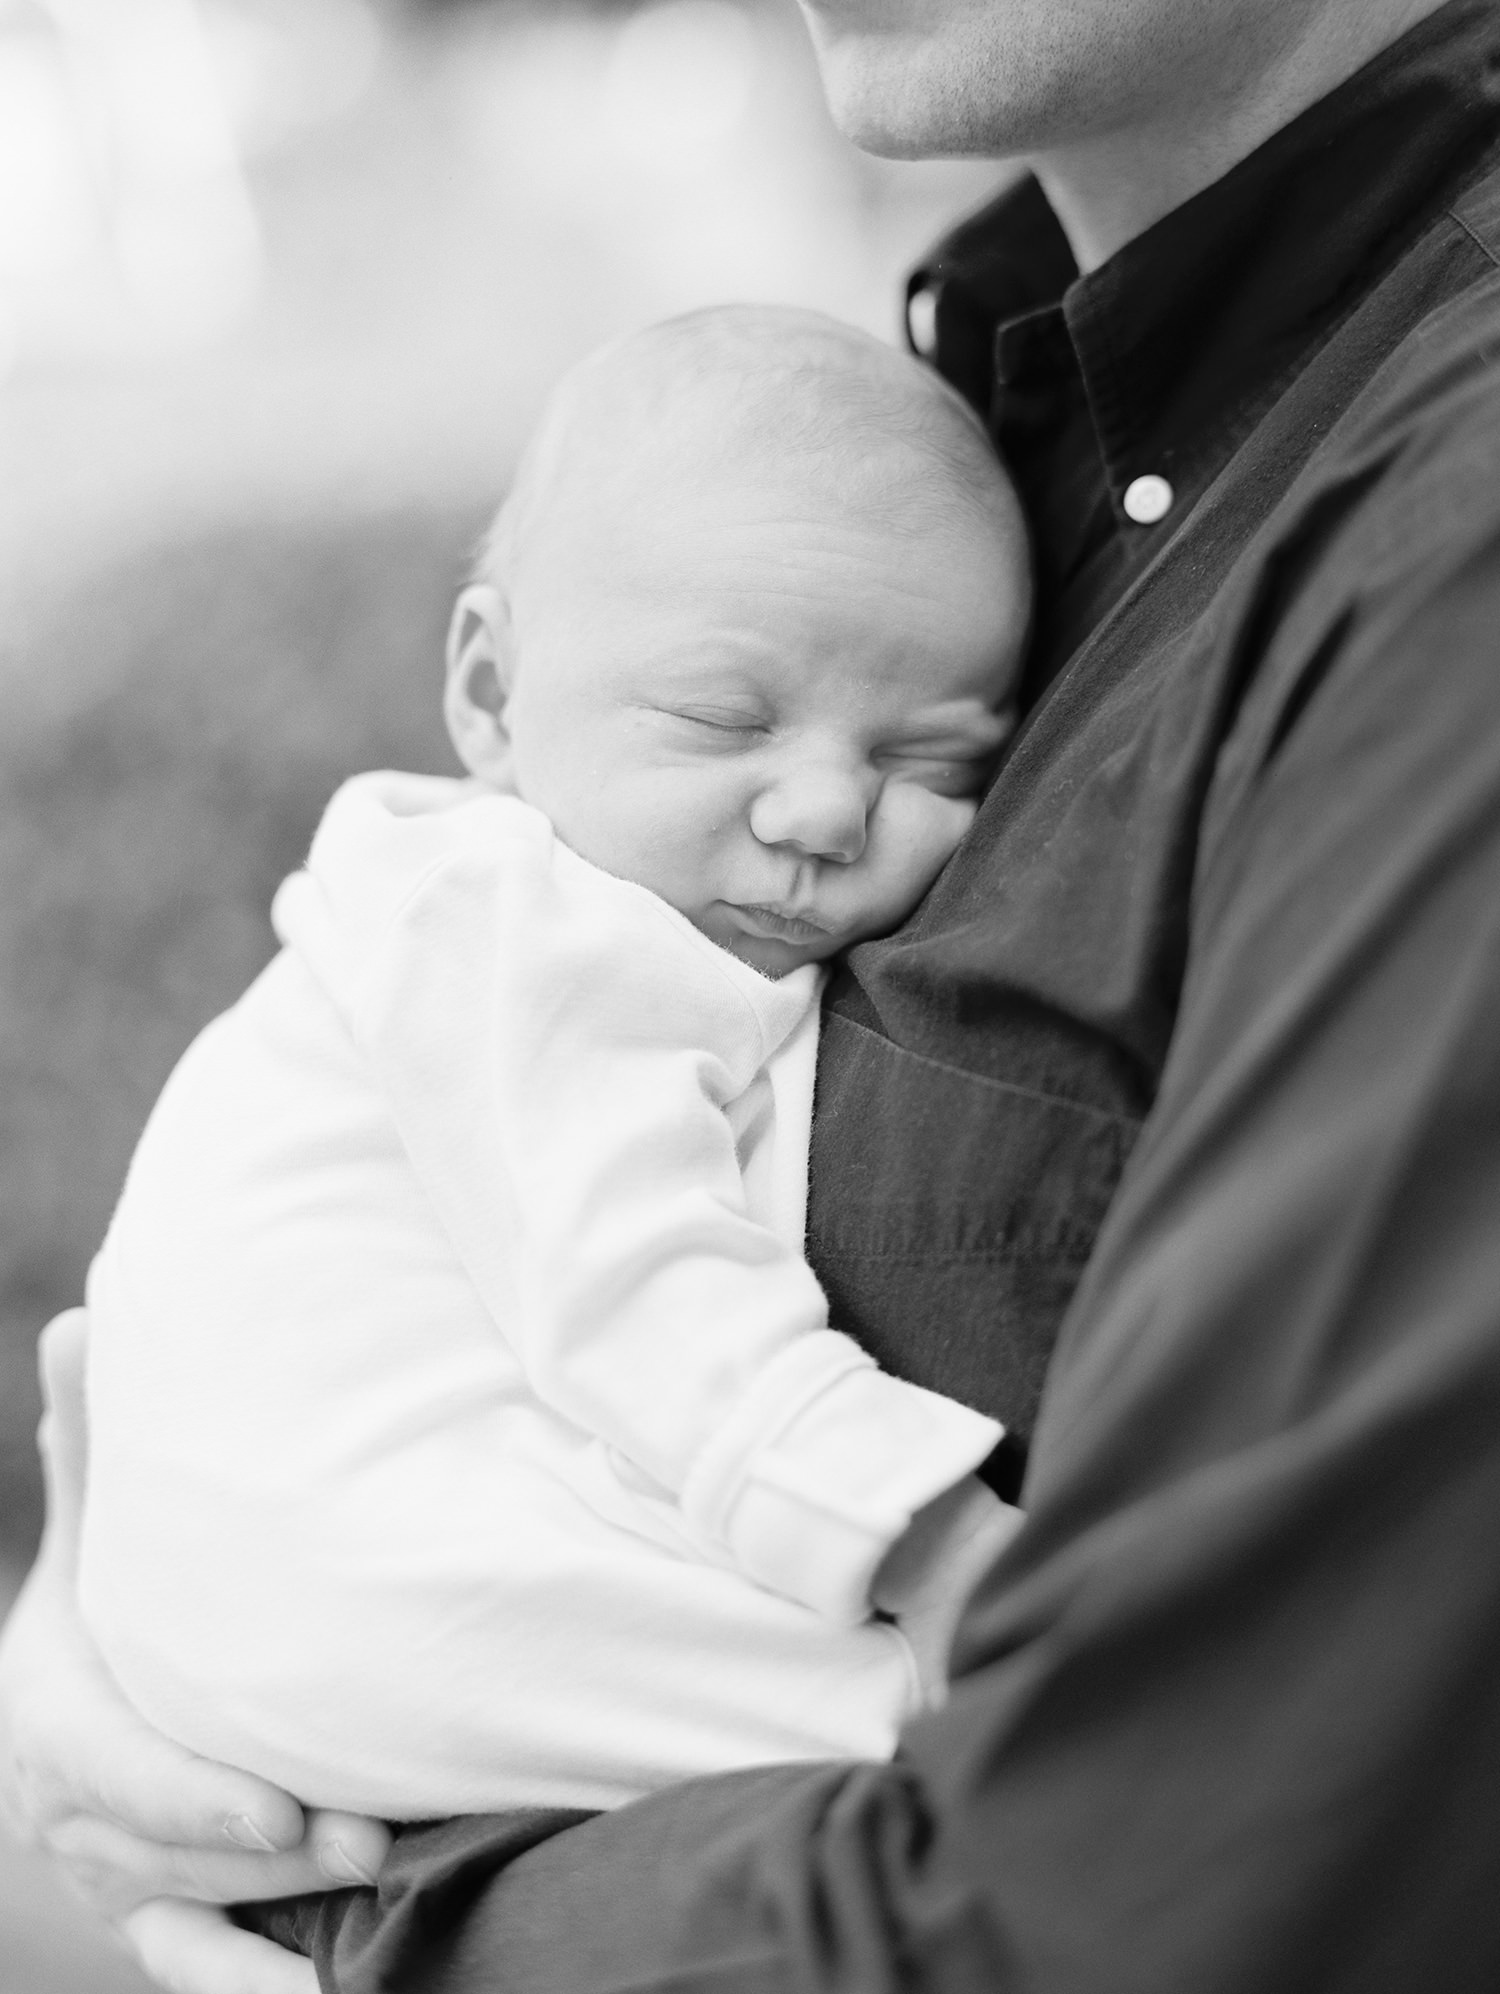 Newborn sleeps while dad holds him by Mary Dougherty